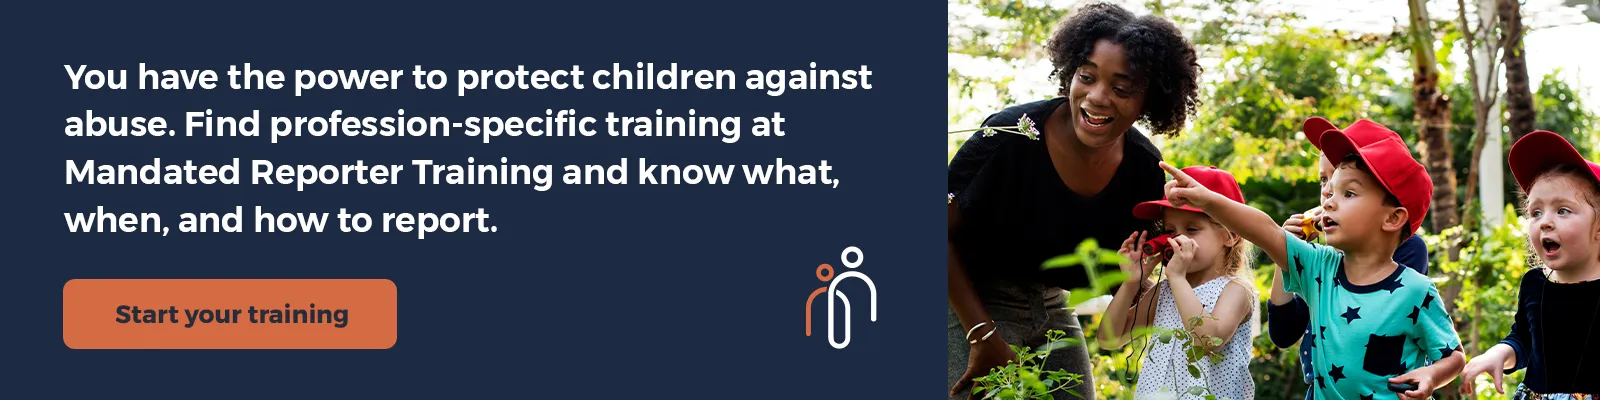 You have the power to protect children against abuse - Start Your Training